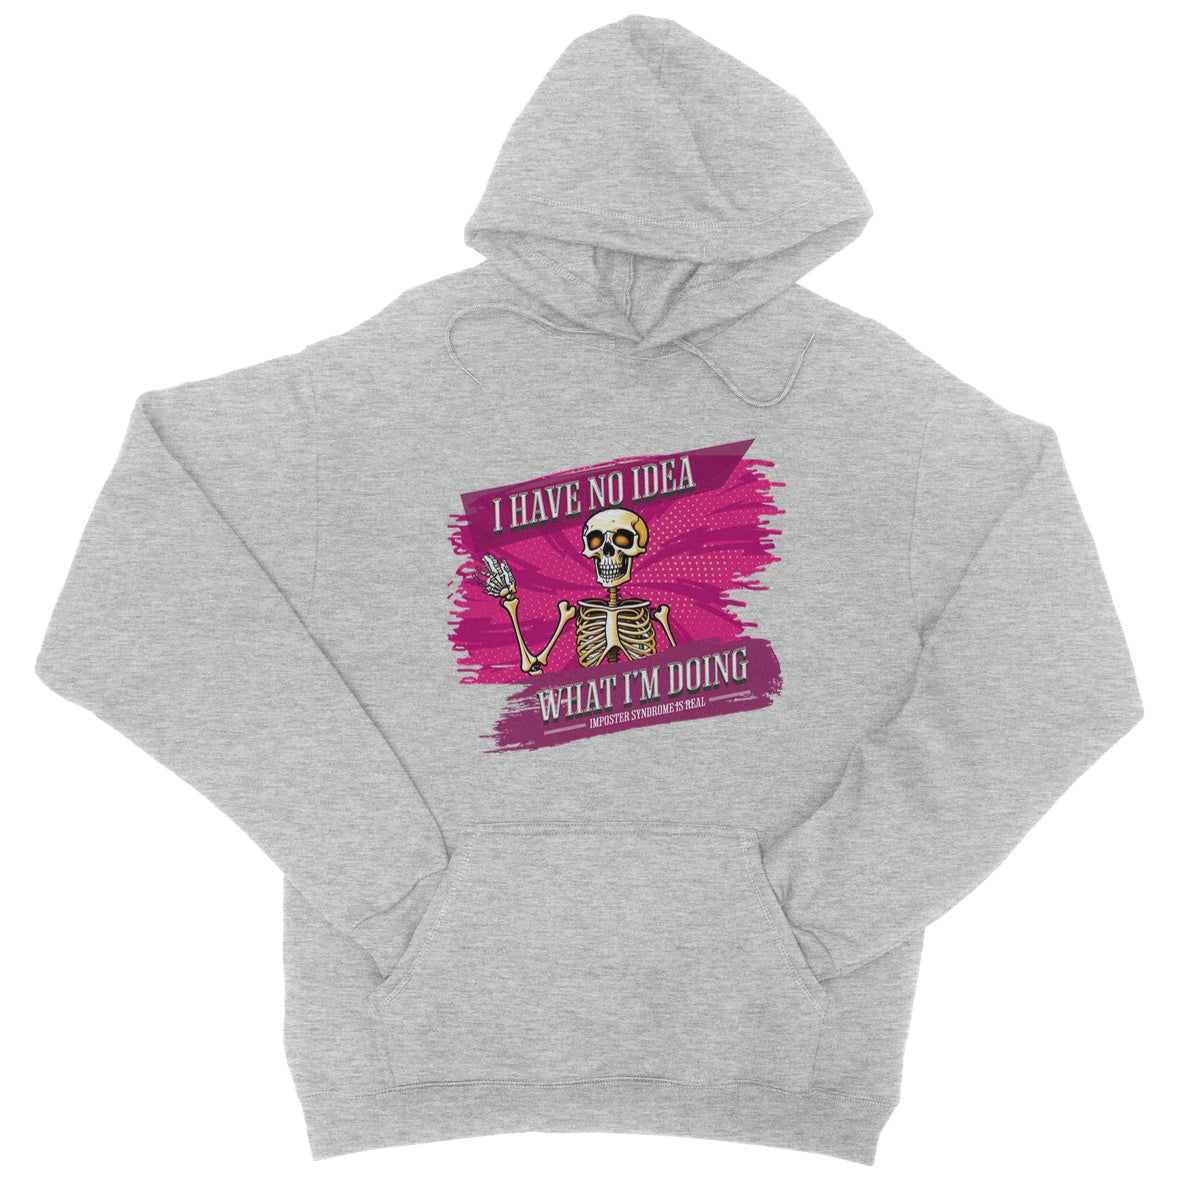 I have no idea what im doing hoodie grey